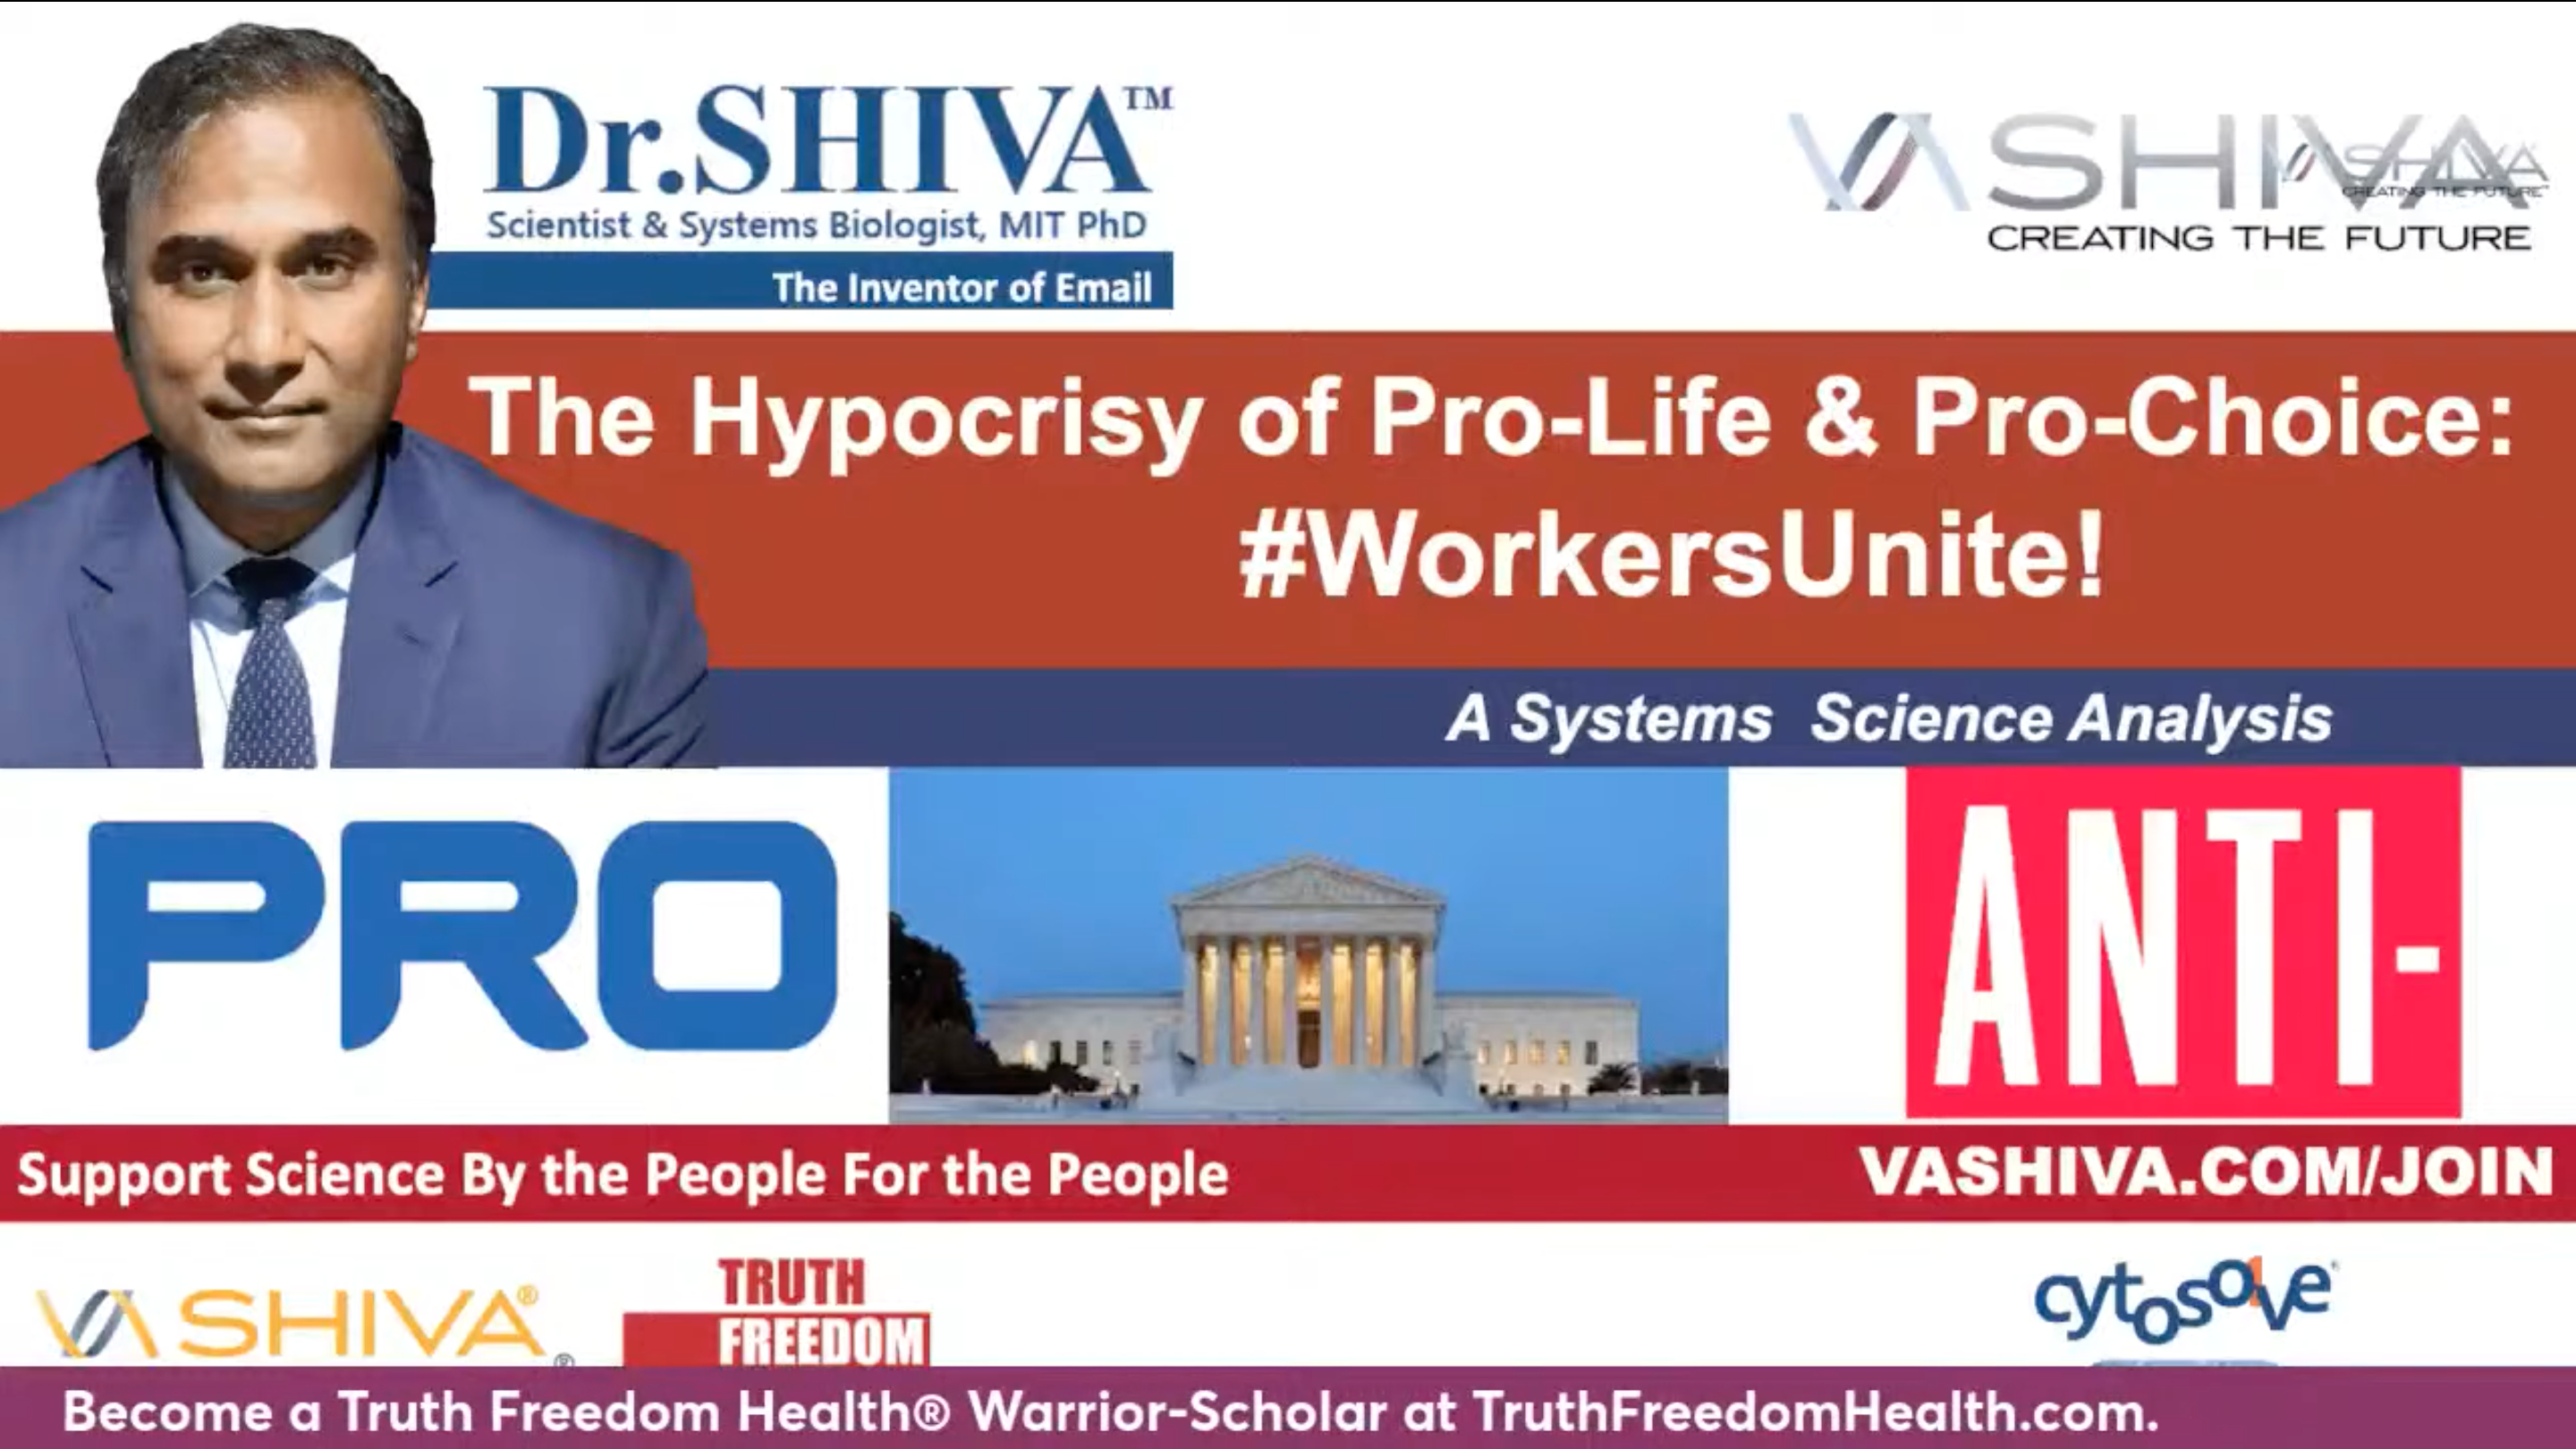 Dr.SHIVA LIVE: The Hypocrisy of Pro-Life and Pro-Choice. #WorkersUnite!